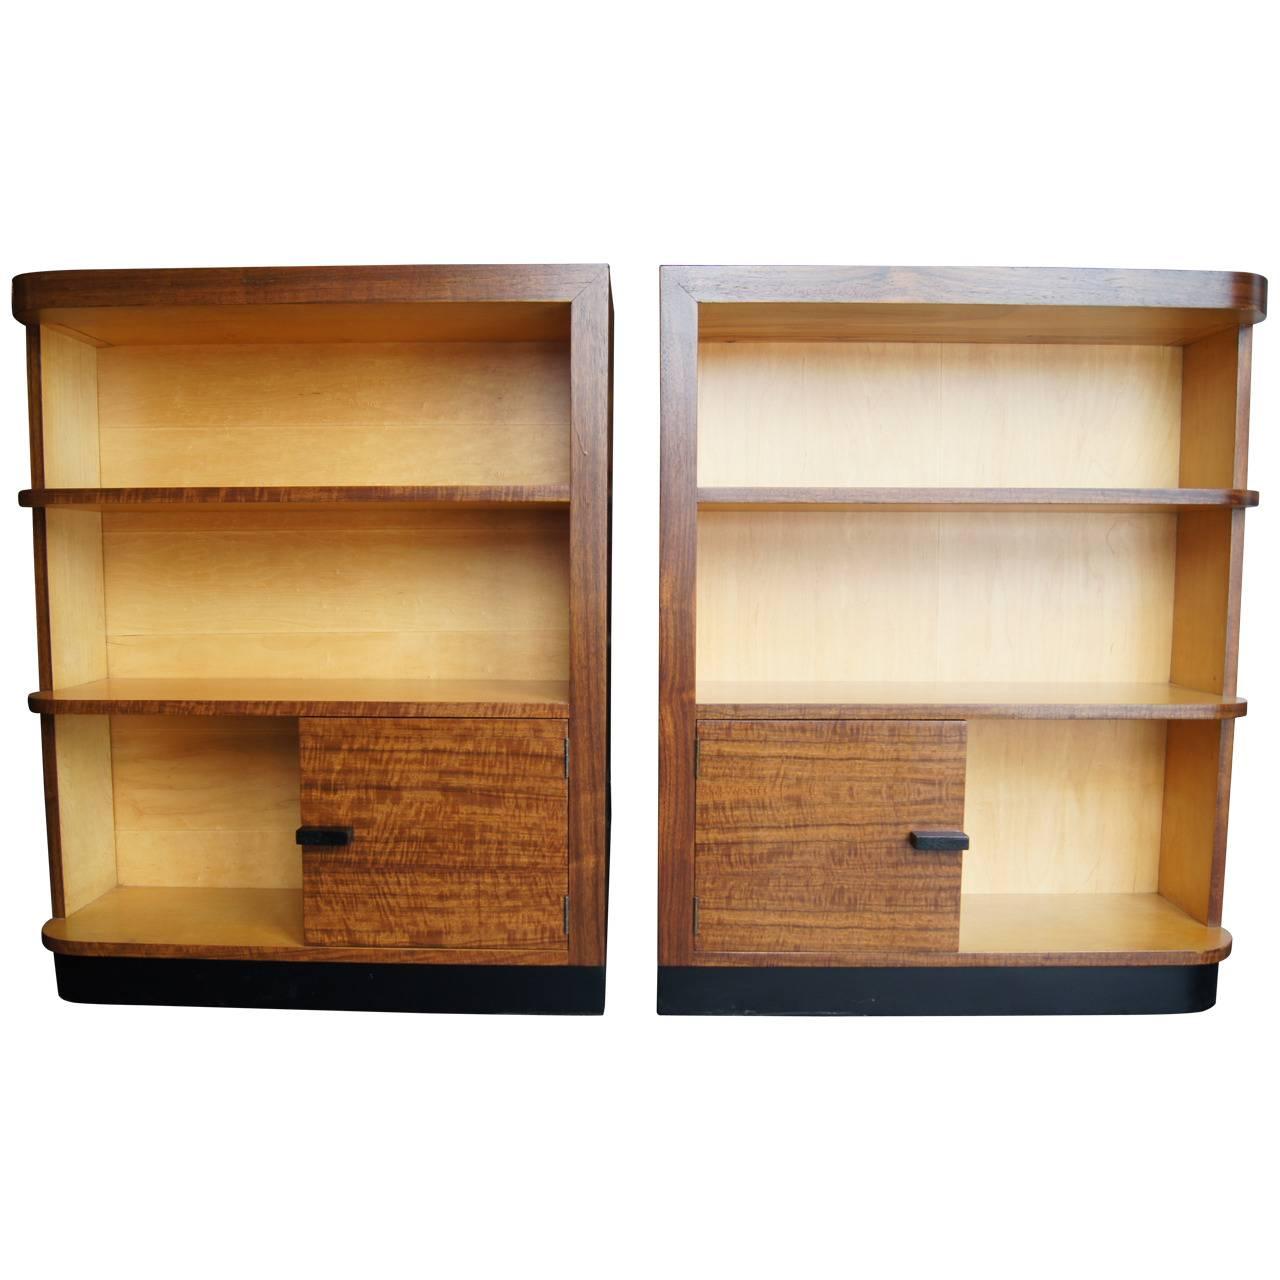 Pair of Art Deco Bookcases by Gilbert Rohde for Herman Miller